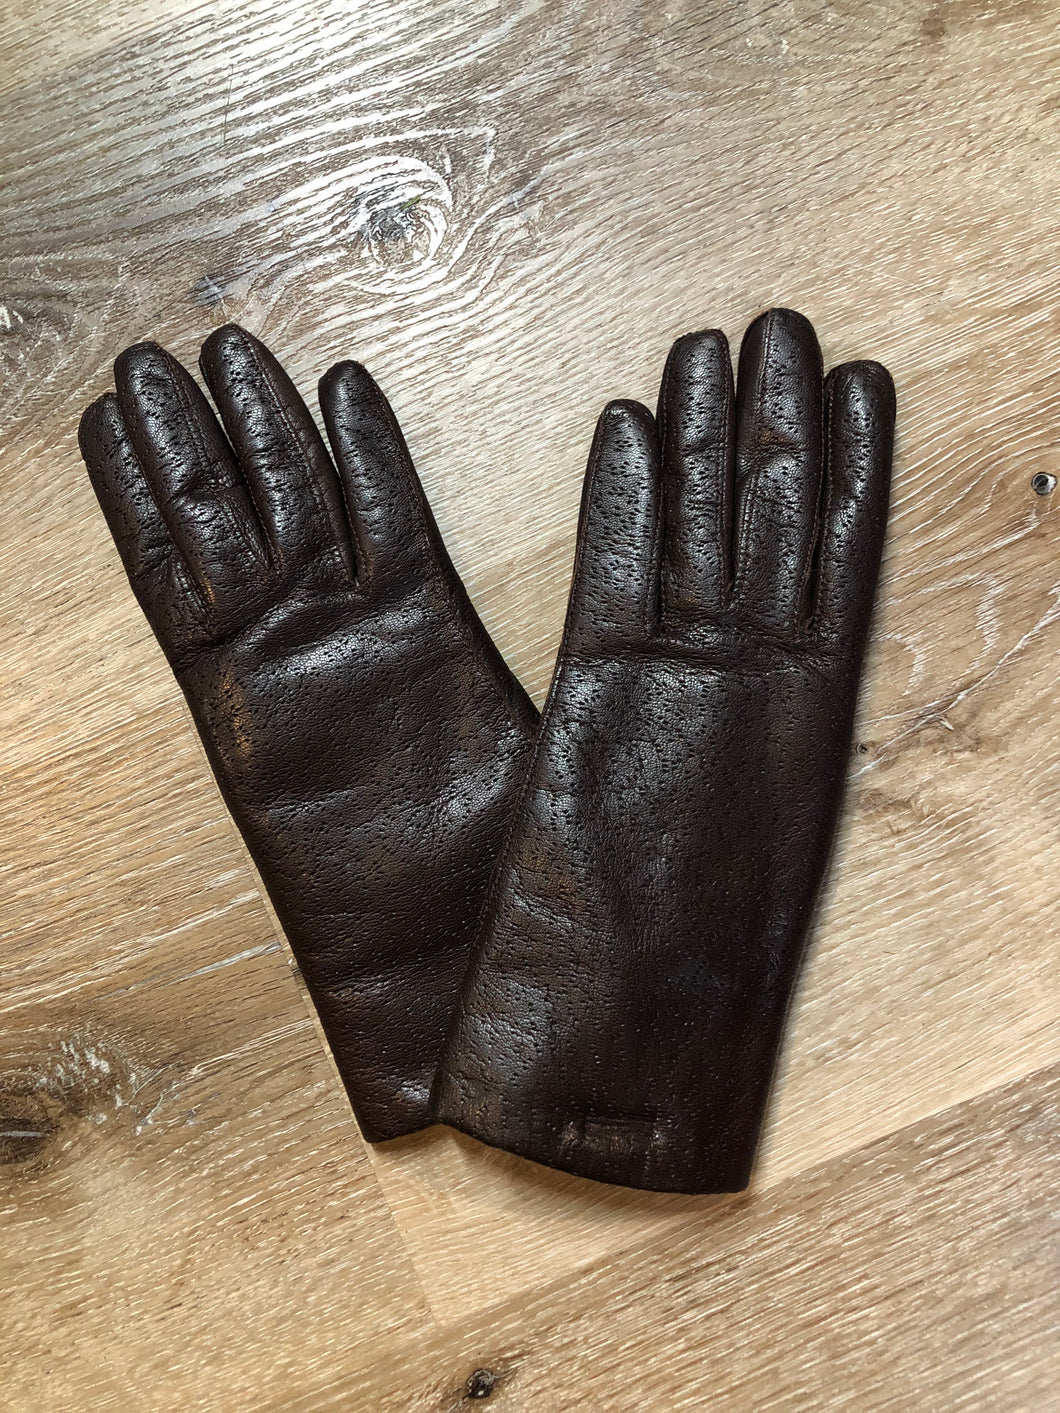 Kingspier Vintage - Dark brown textured leather gloves with white fur lining. Size small/ 6.5. Made in Hungary.